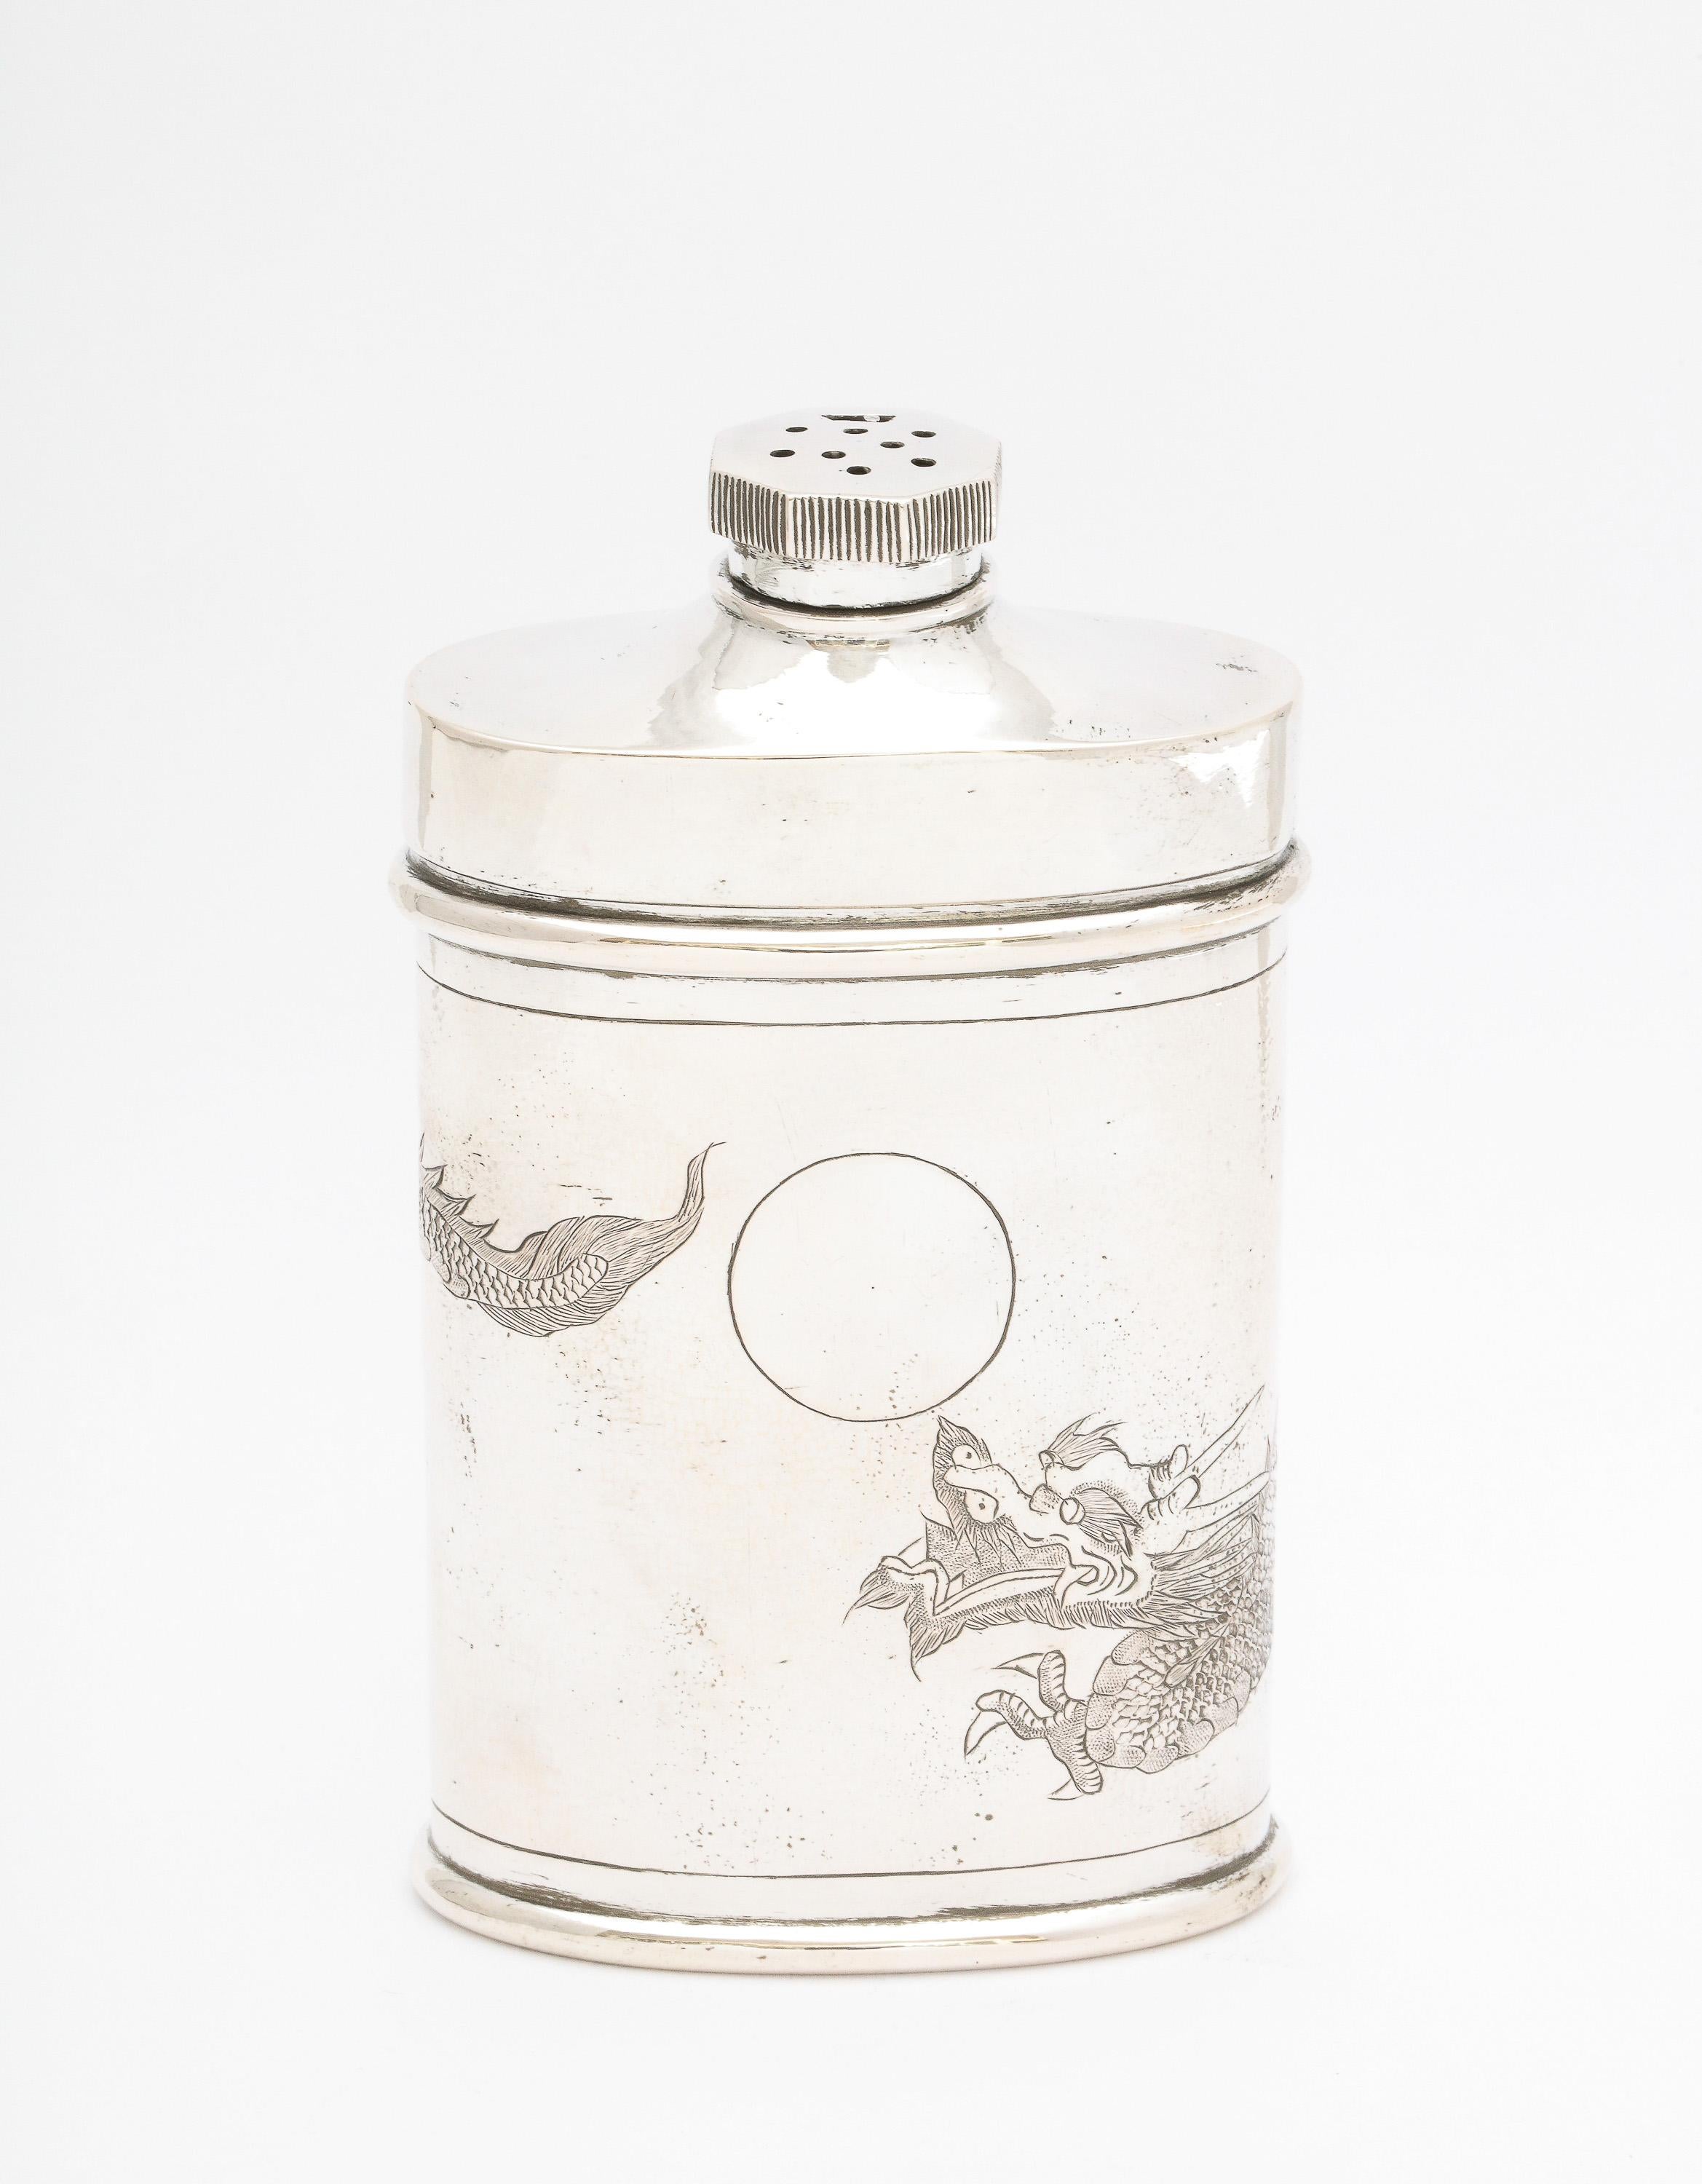 Chinese Export, sterling silver powder/talc holder/shaker, China, Ca. 1900. Decorated with an etched, full dragon that wraps itself around the holder/shaker. Holder is also lightly hammered in design. Vacant cartouche. Closure mechanism on cap/lid